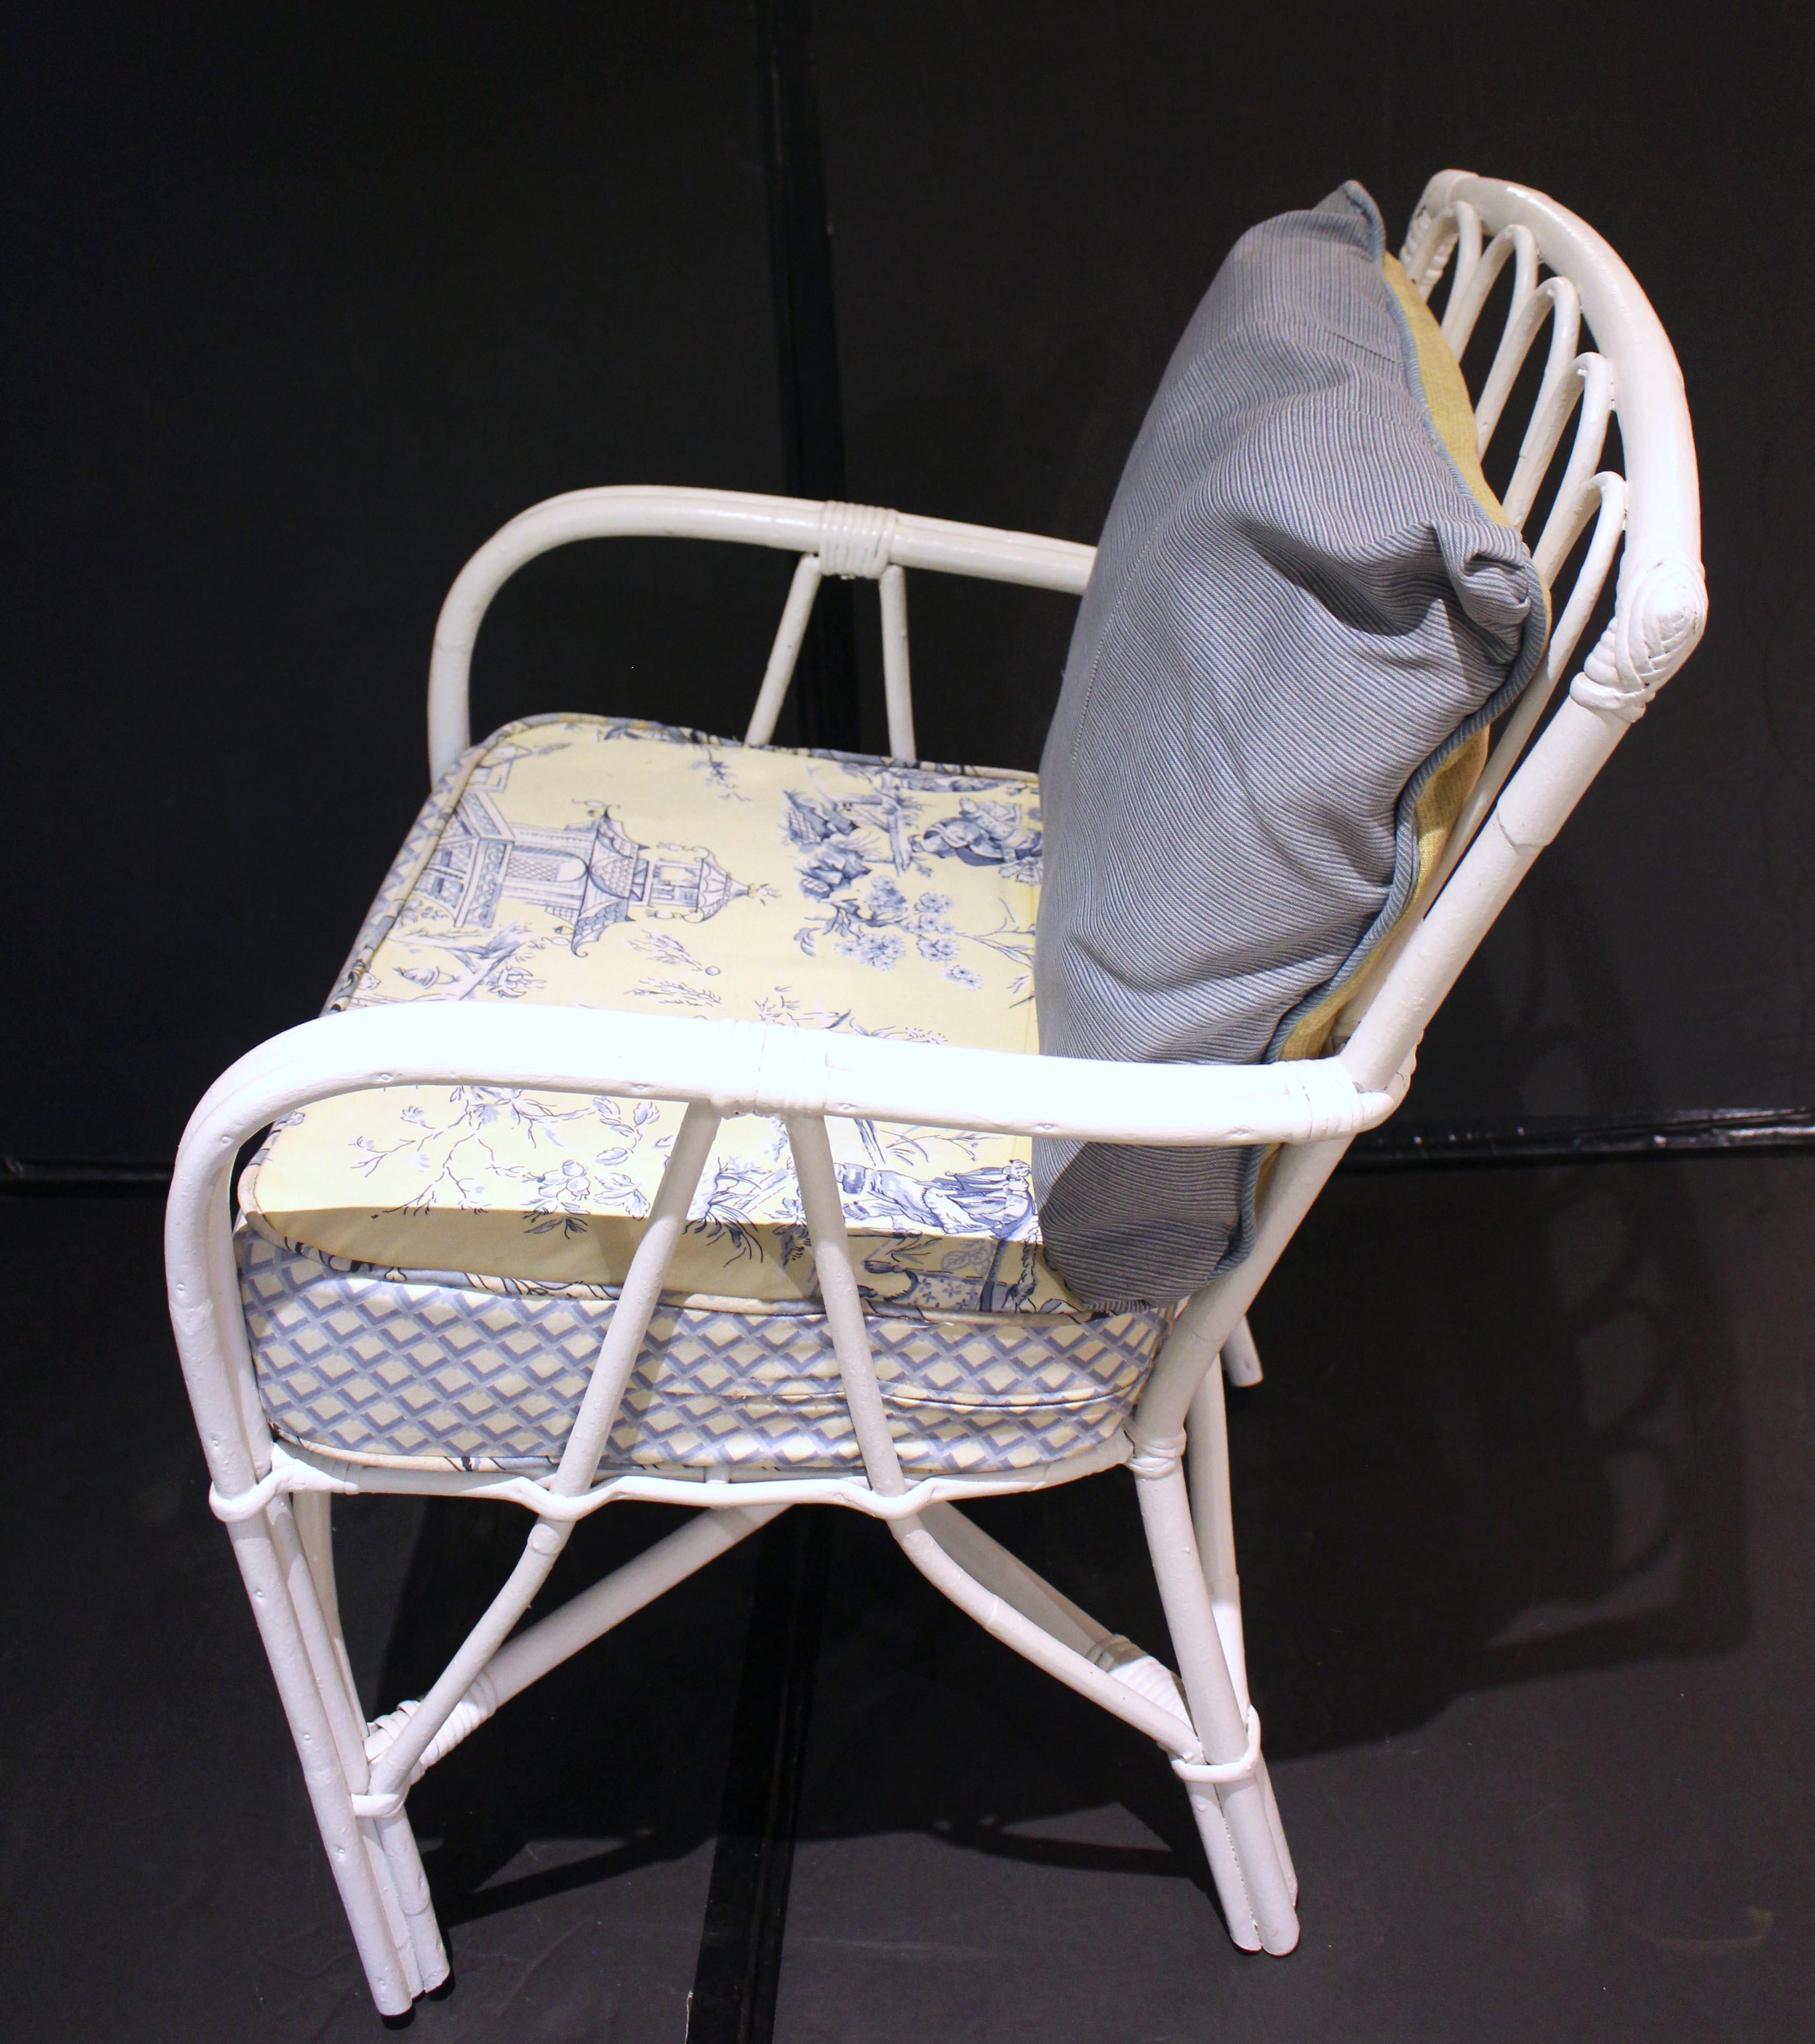 Mid-20th century Ficks Reed rattan arm chair. Elegant design; repainted with custom toile seat cushion (used condition). Includes back cushion. 18.5